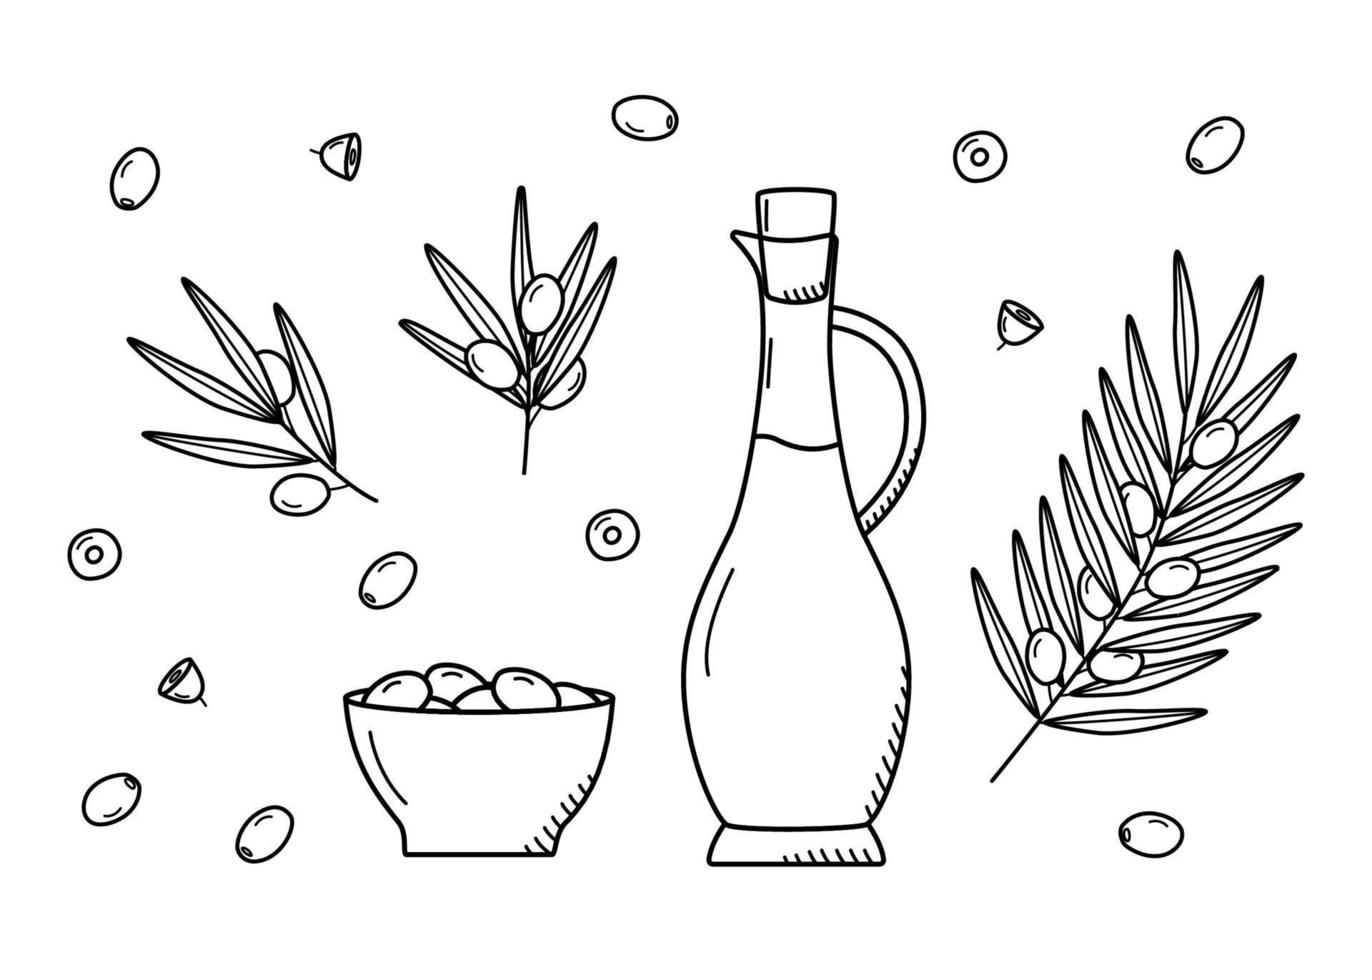 Olives, olive oil and branches with leaves and berries. Vector illustration of a set olives